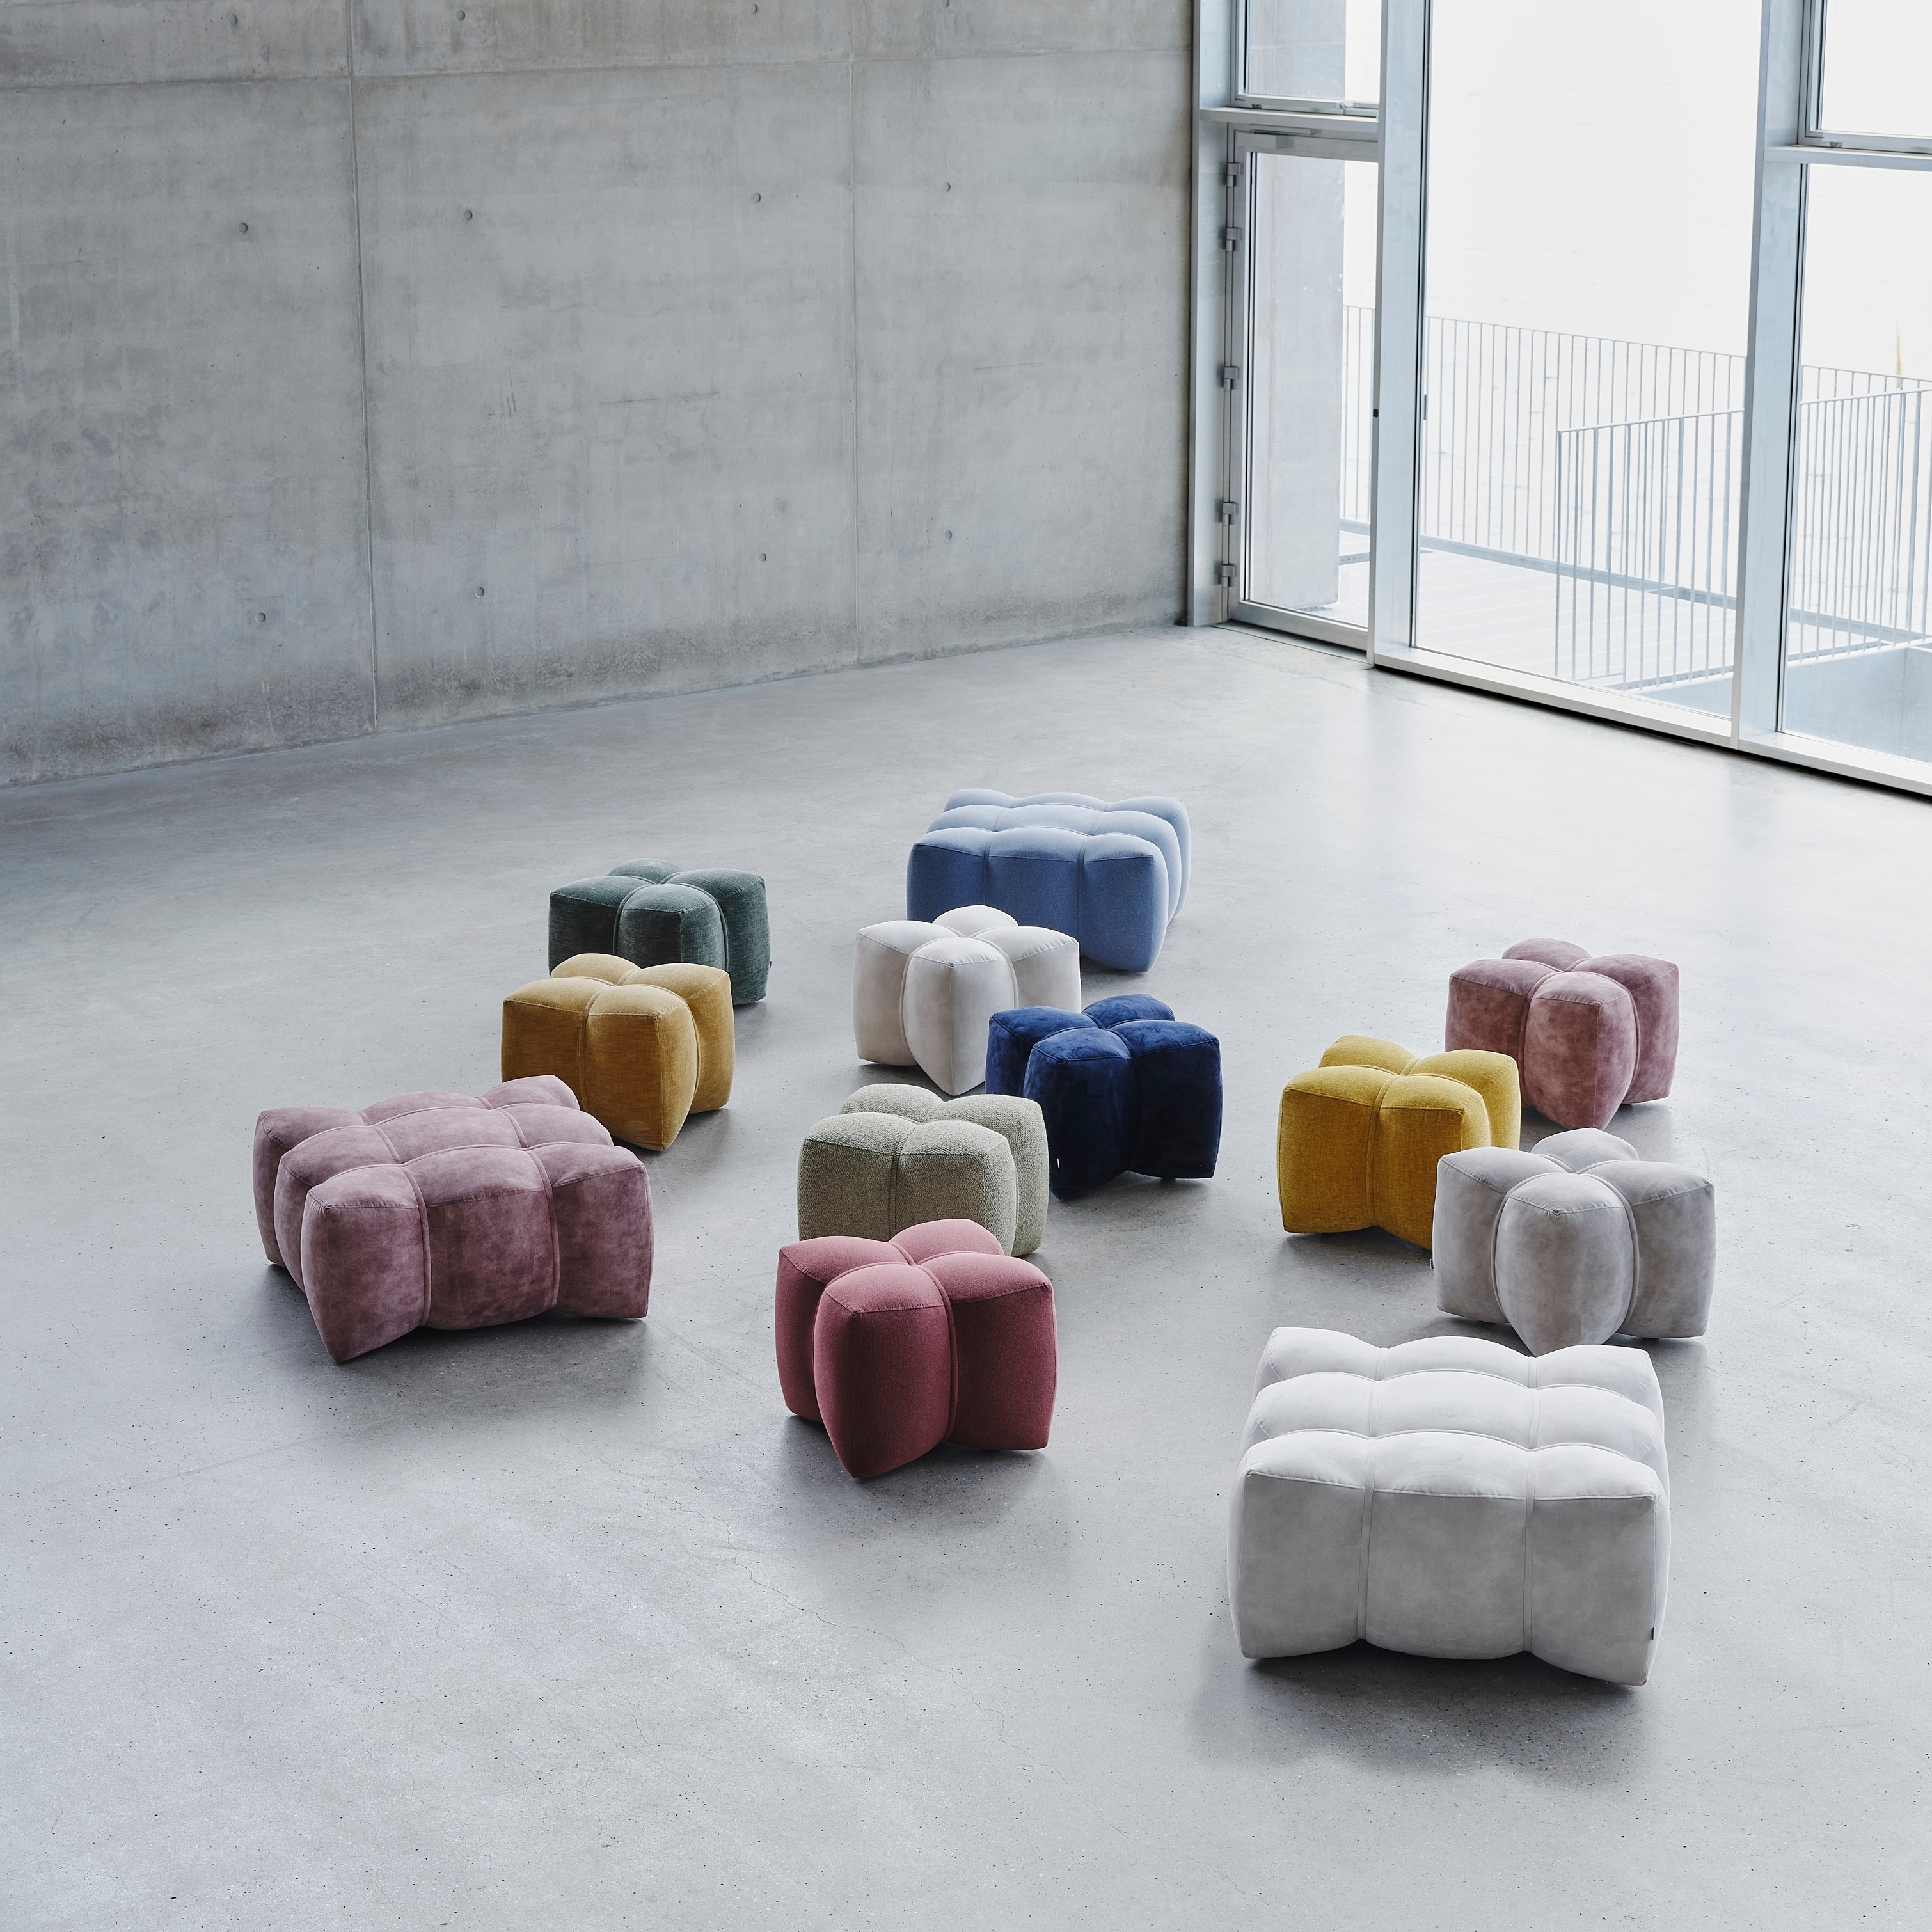 Variety of NAWABARI pouffes in a modern, airy space with concrete walls and daylight.